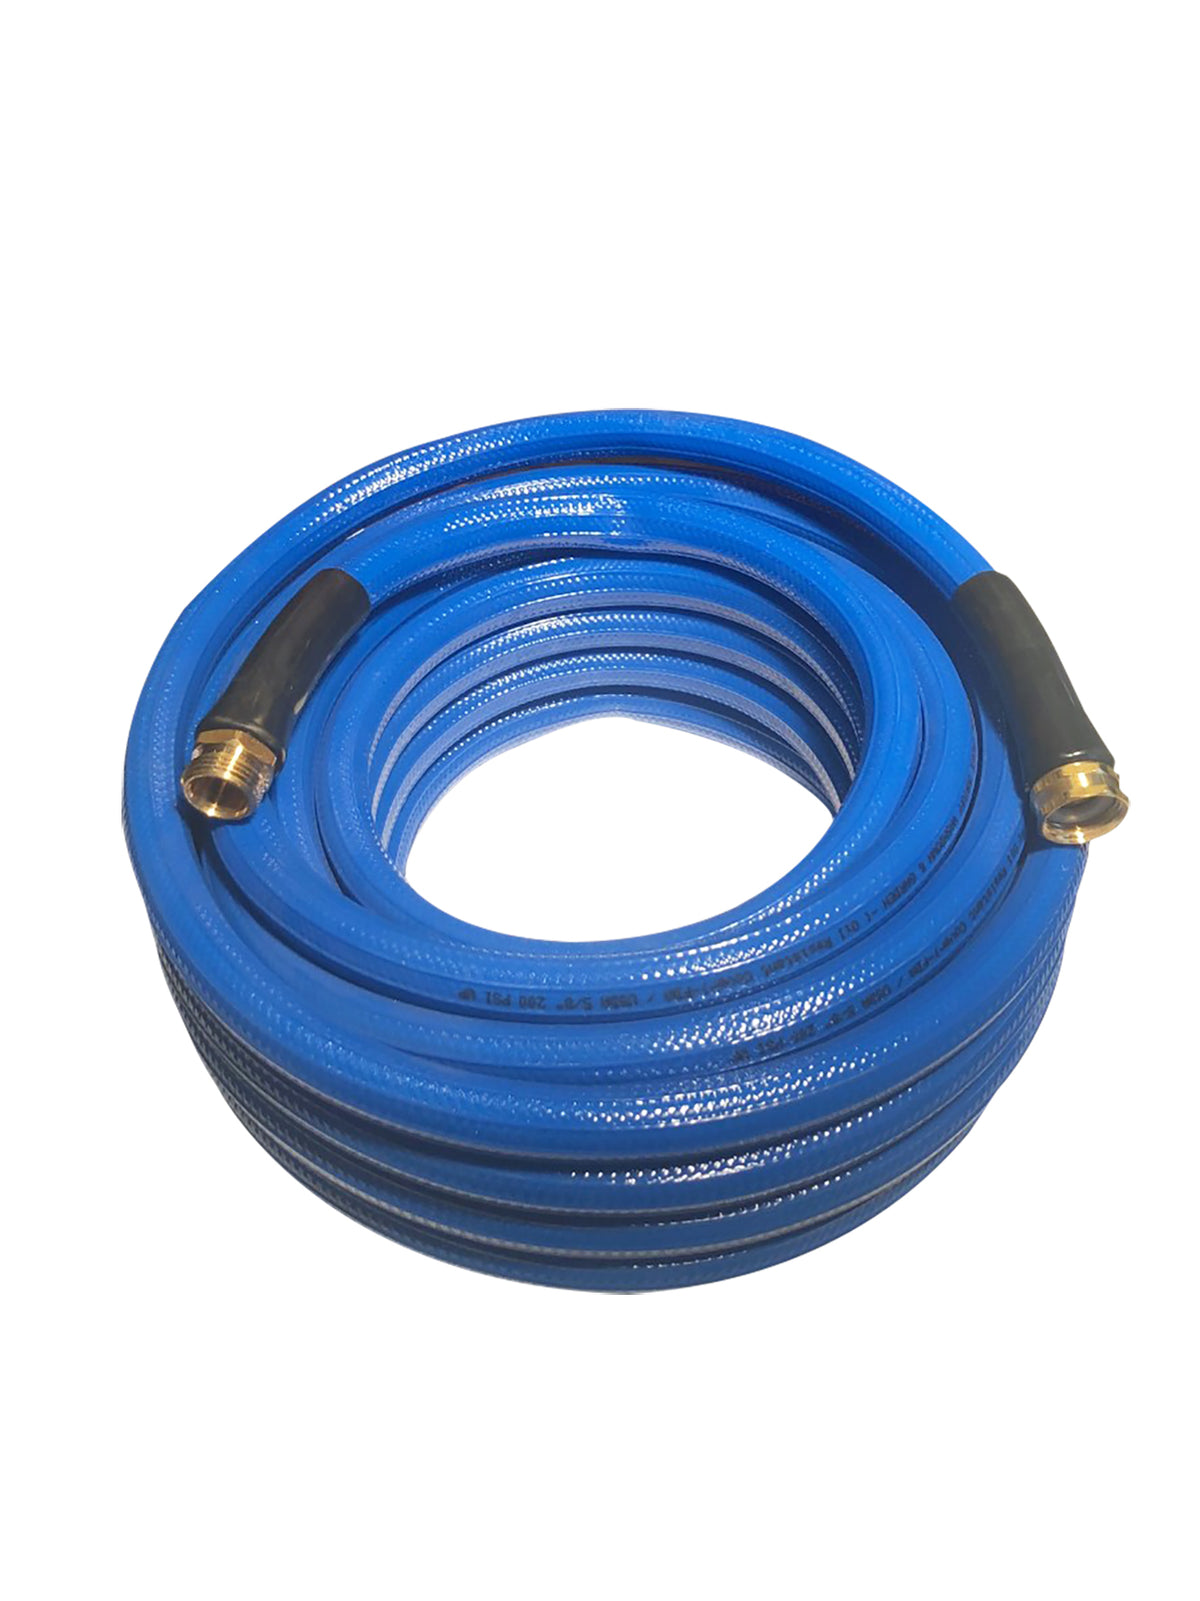 Find the best products and deals on Premium Lightweight Polyurethane Garden  Hose by Industrial Choice - 3/4 X 100 ft - Drinking Safe Factory Direct Hose